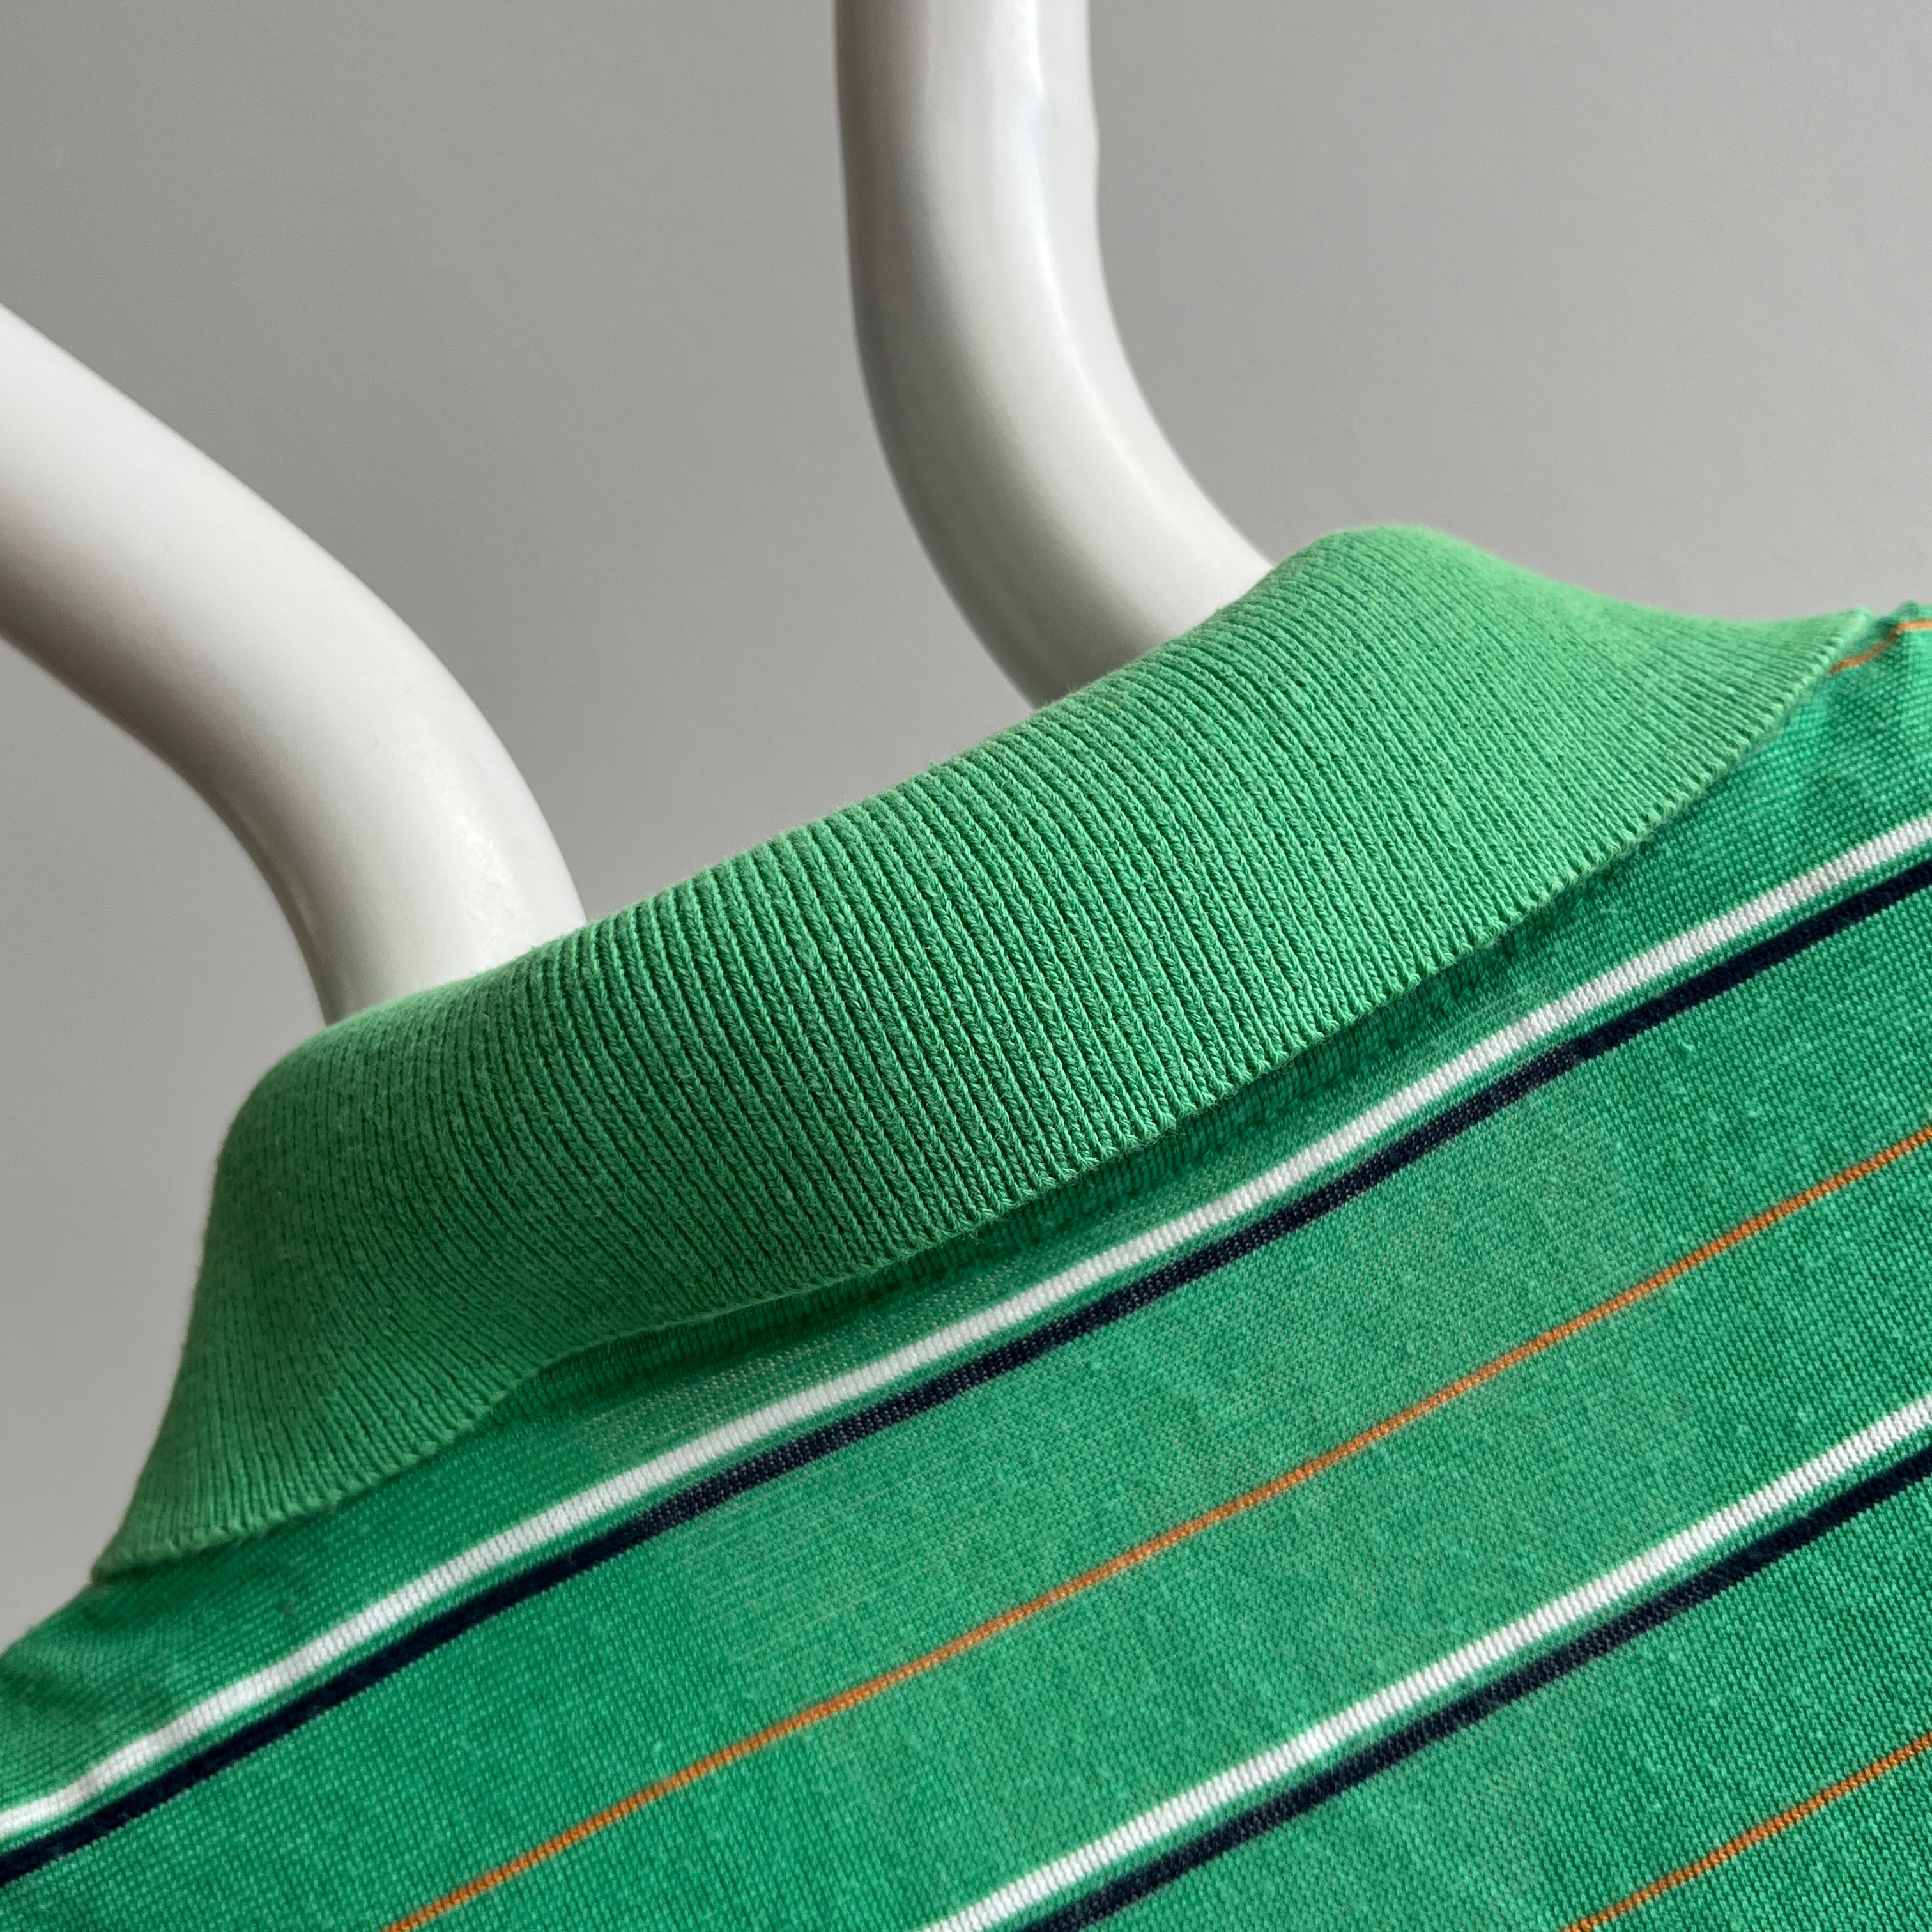 1970s Striped Lightweight Polo Shirt - THIS